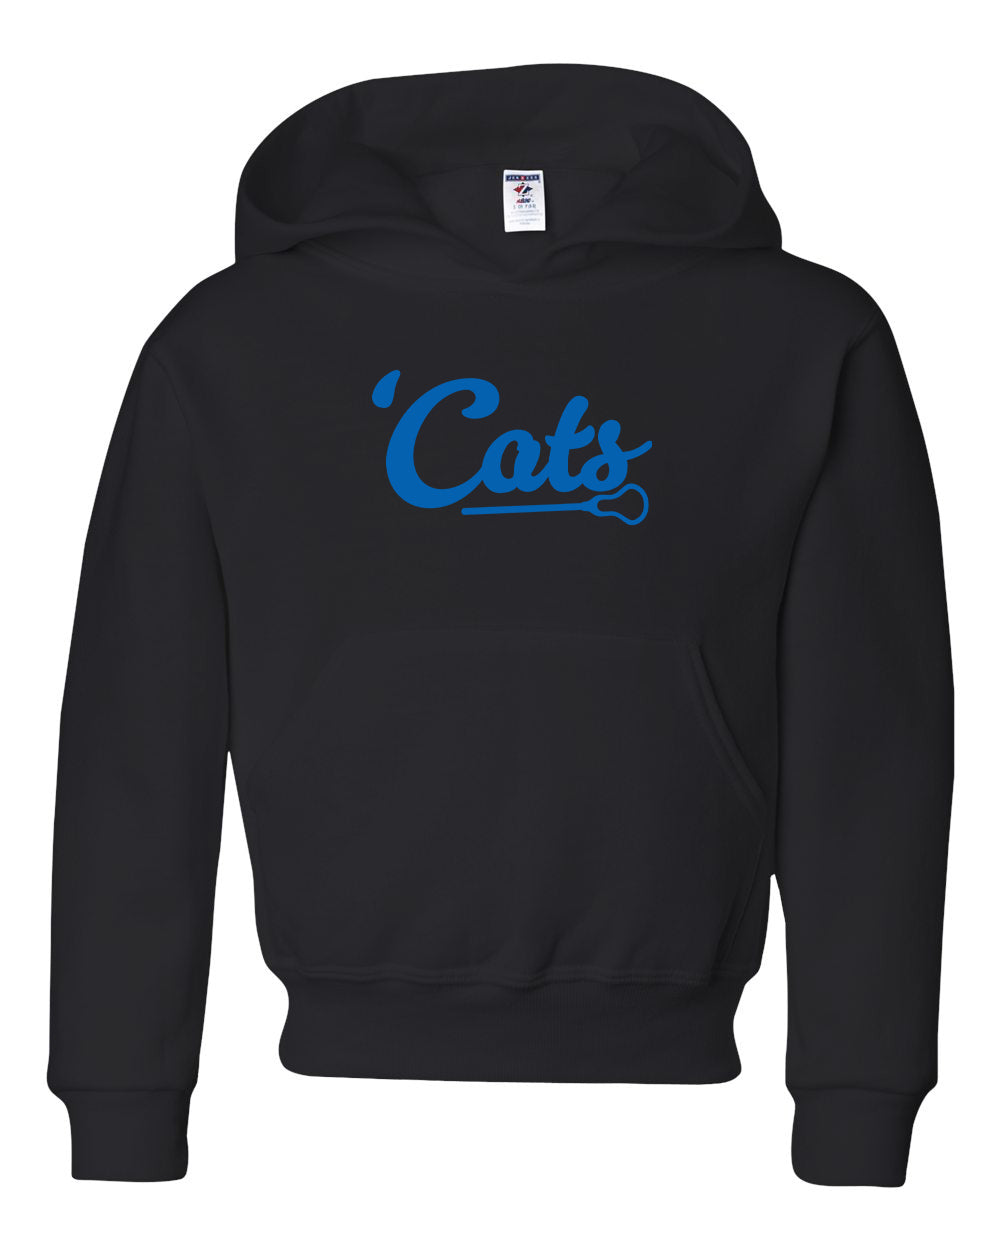 Suffield High Lacrosse - Youth Hoodie "Cats/Stick" - 996YR (color options available)